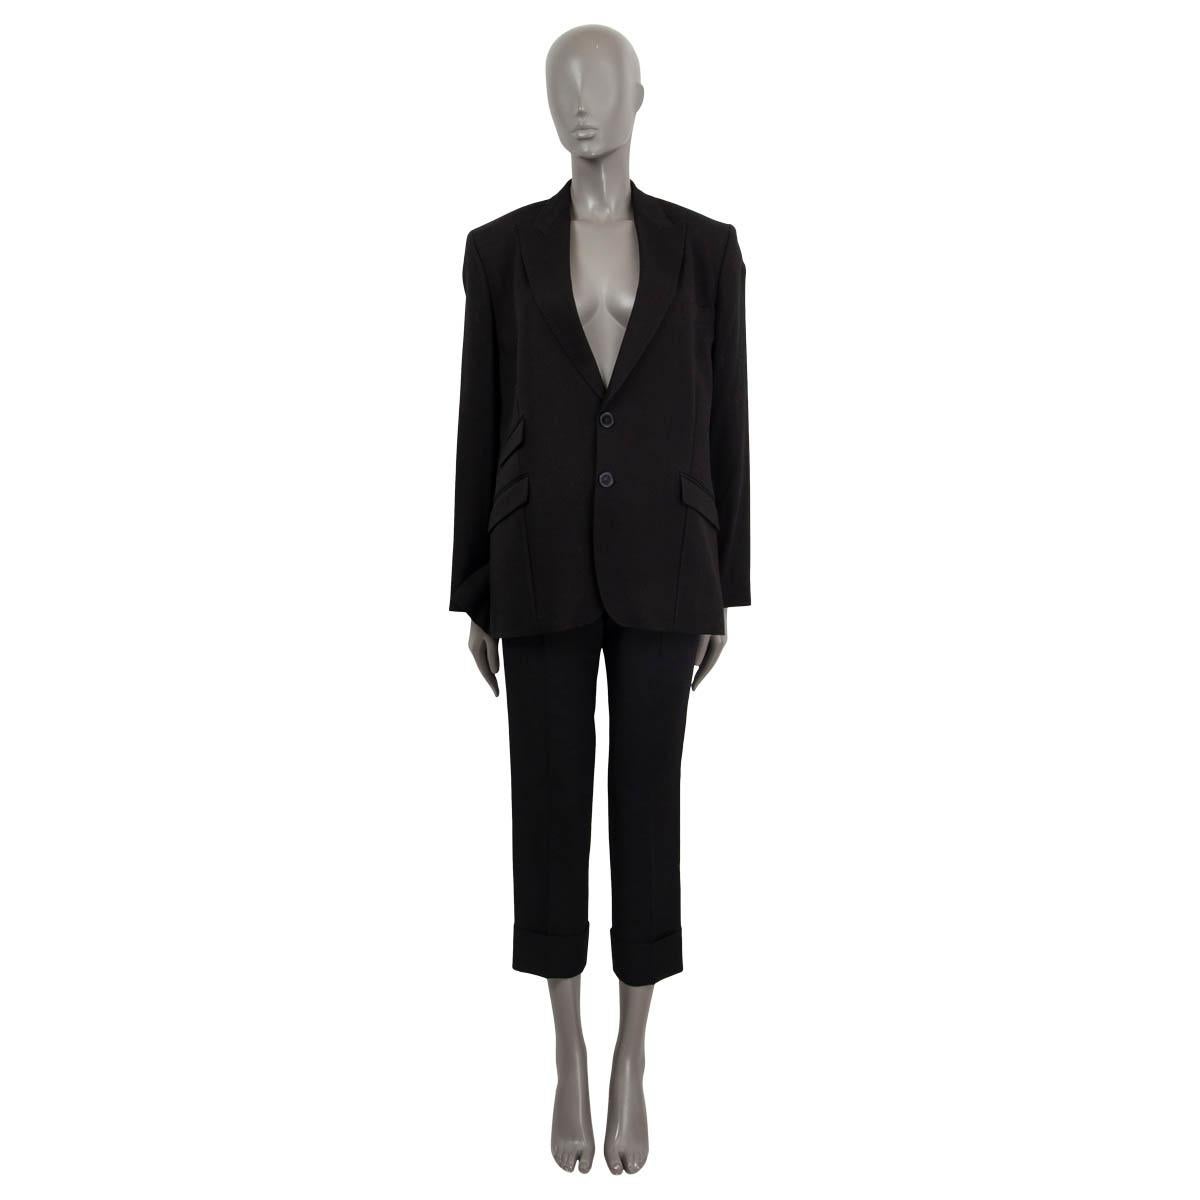 100% authentic Stella McCartney 'Bell' oversized single button blazer in black viscose (86%) and linen (14%). Features buttoned cuffs and three sewn shut flap pockets on the front. Opens with one button on the front. Lined in sand viscose (100%).